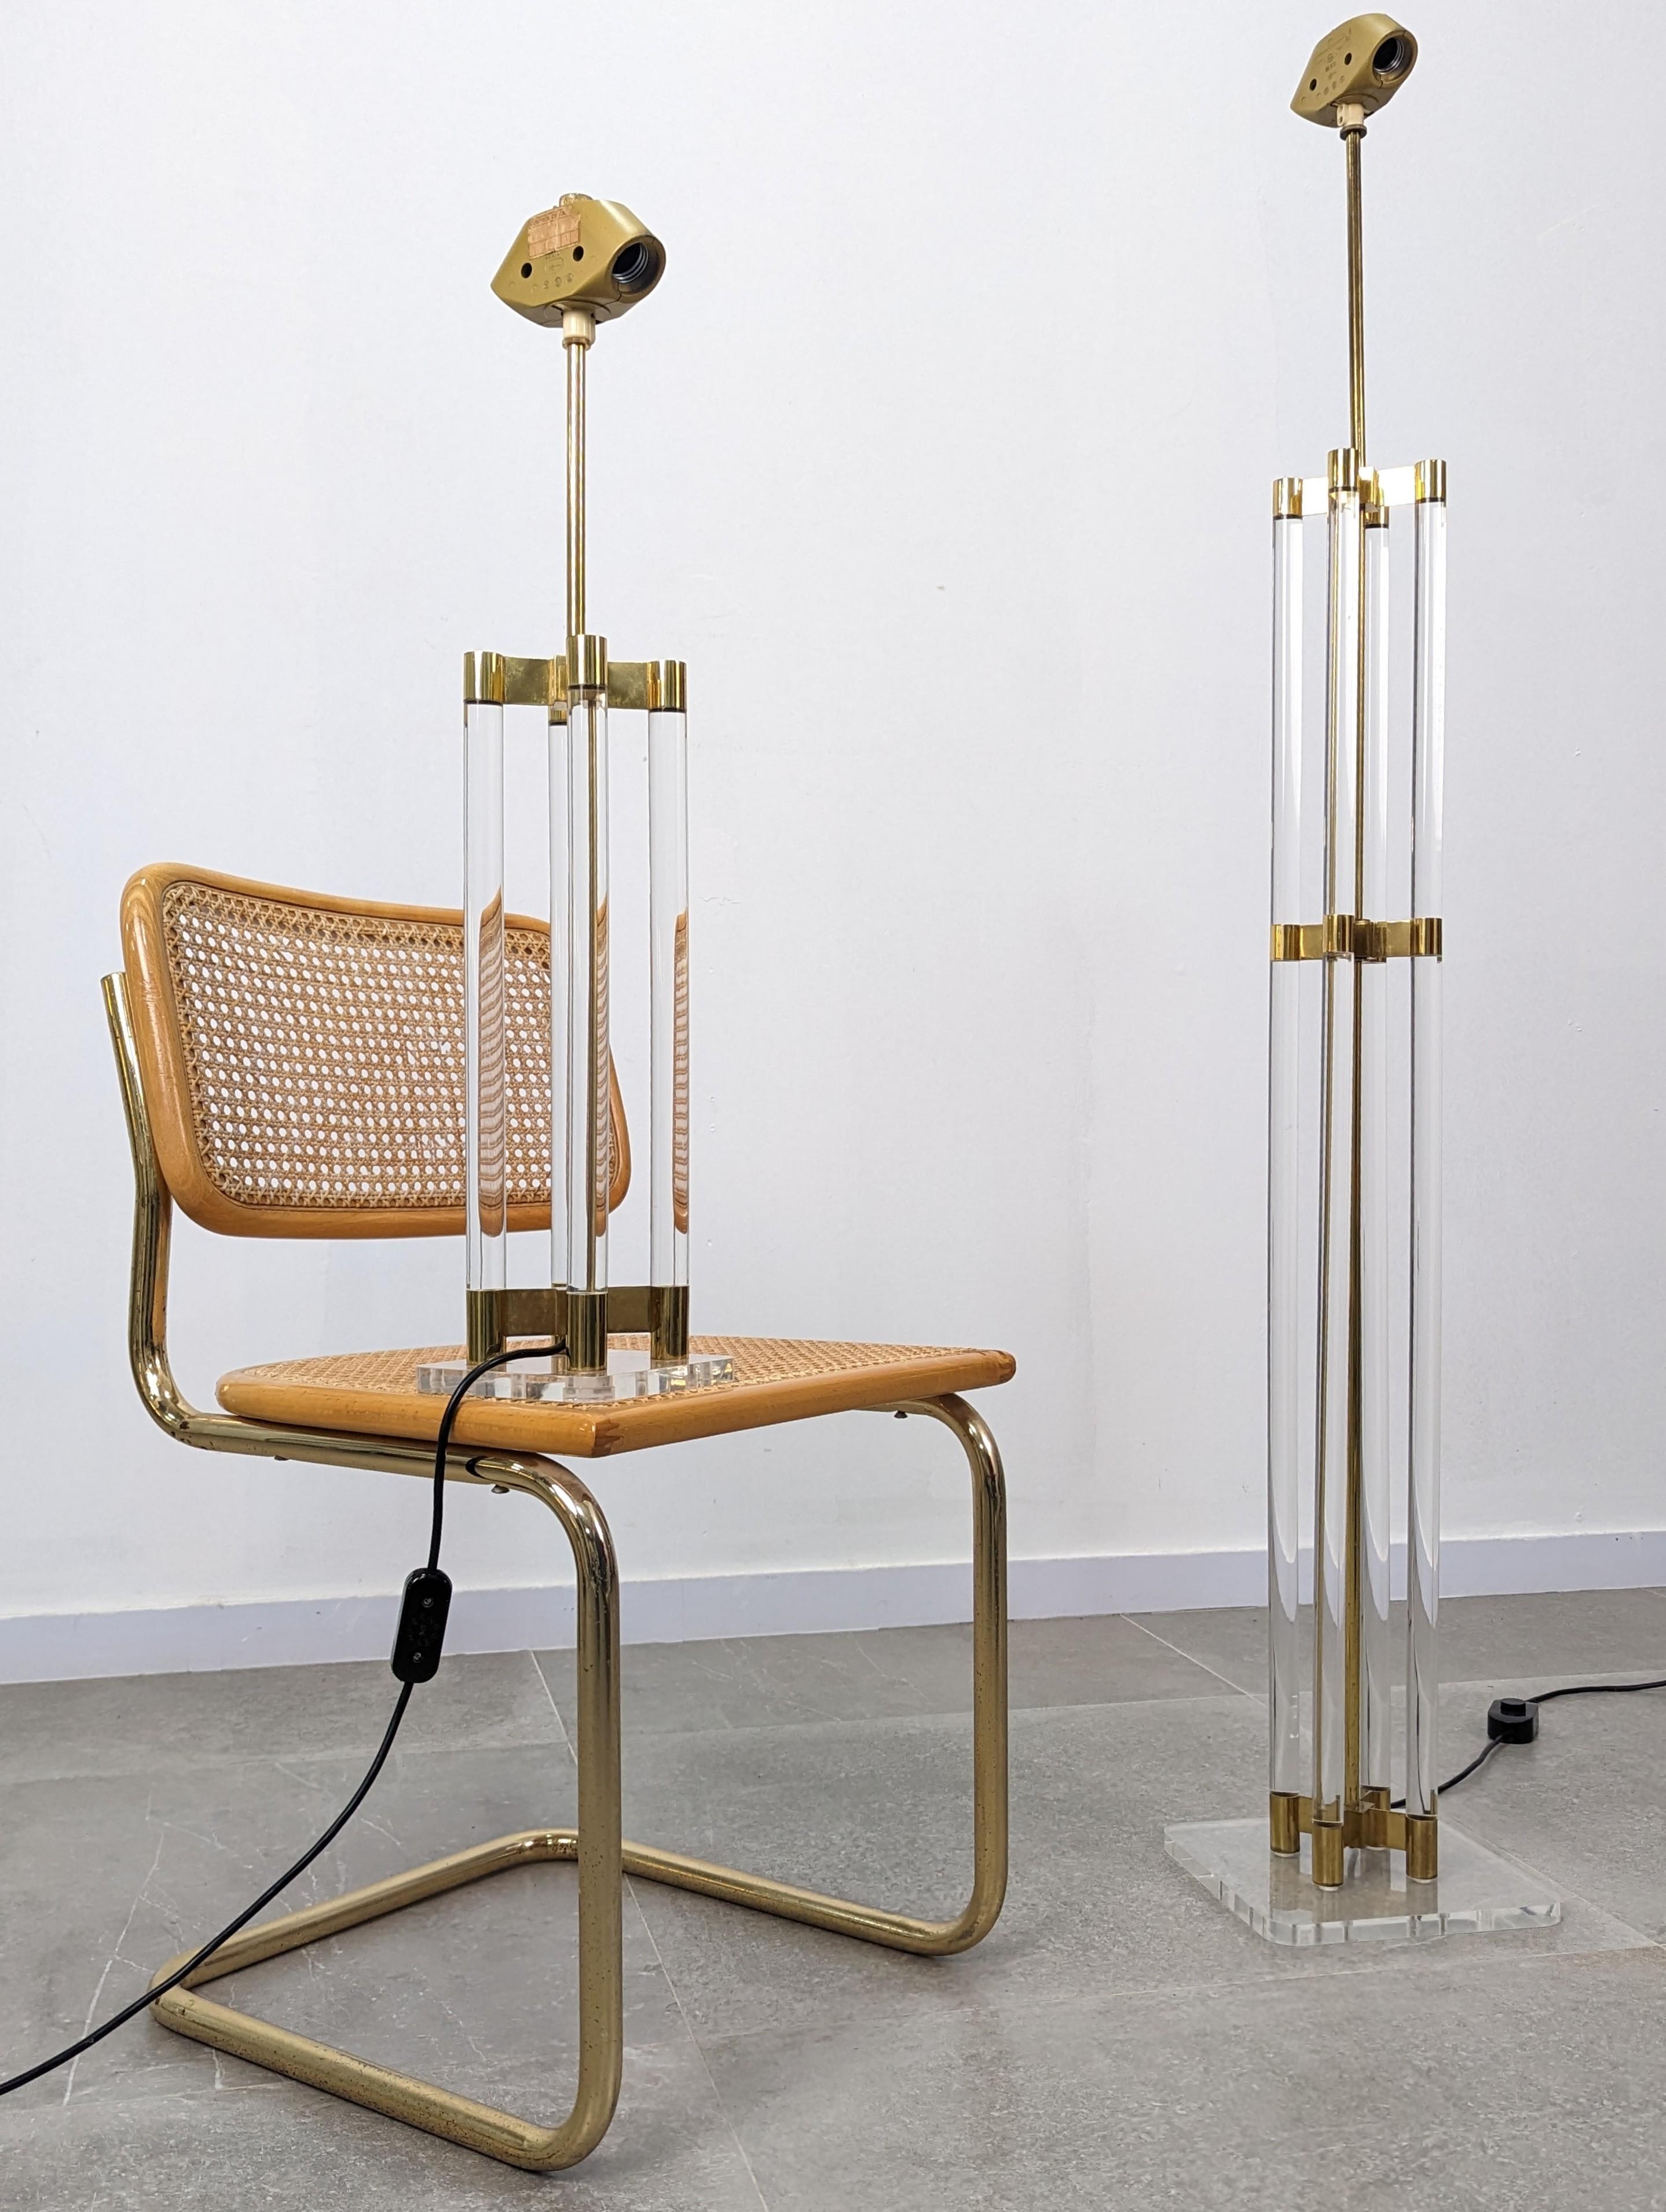 European Vintage Floor Lamp Lucite and Brass, 1970s For Sale